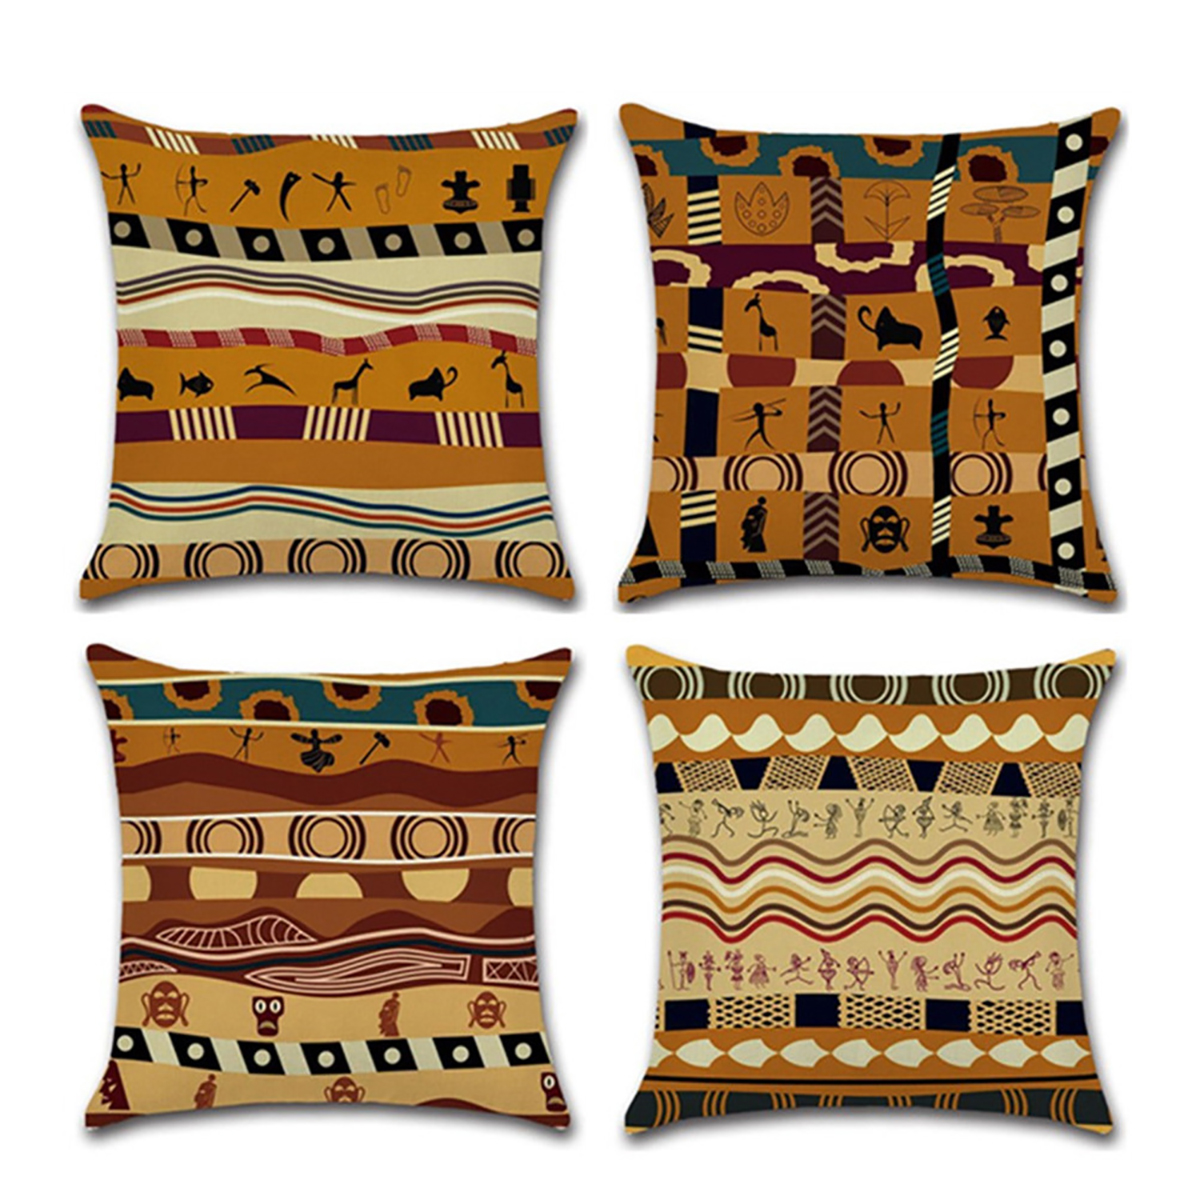 45x45CM-African-National-Style-Geometric-Printing-Cushion-Cover-Linen-Pillow-Case-Home-Decor-Pillow--1915524-2